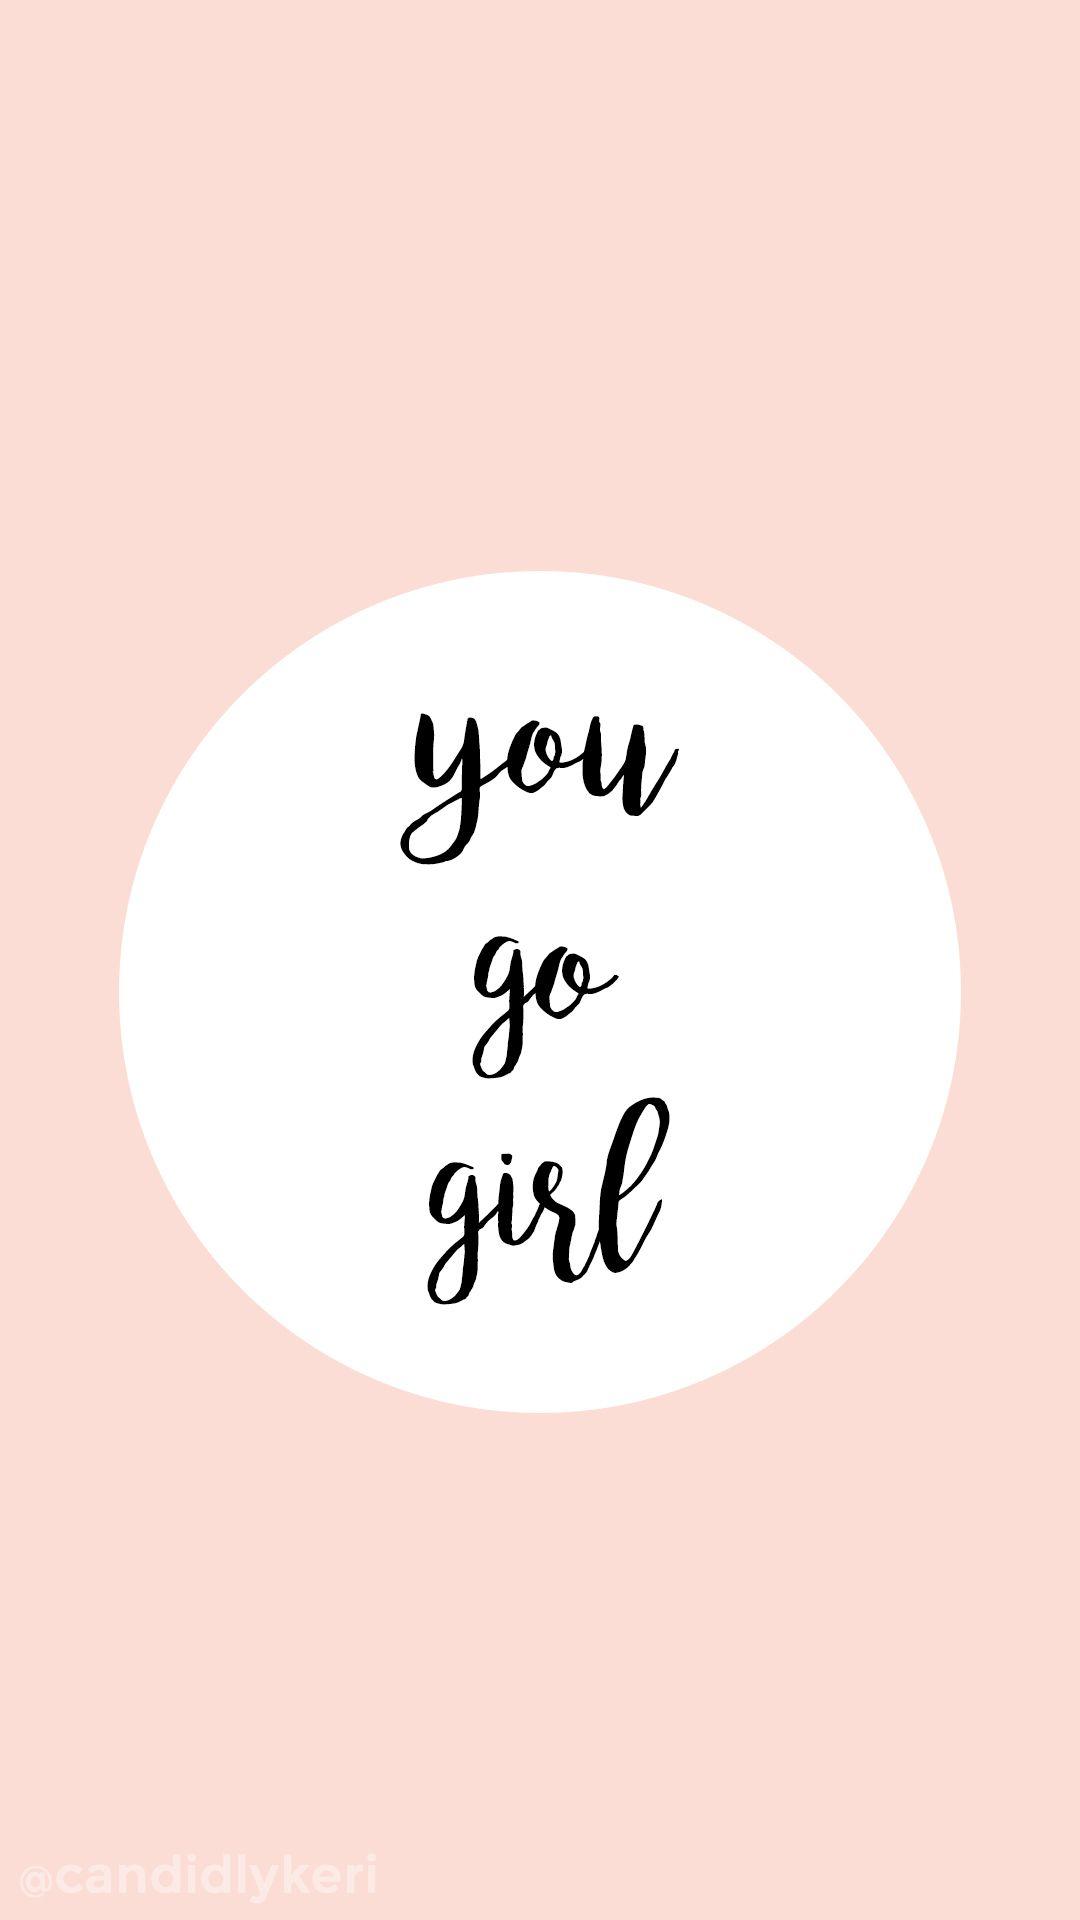 You Go Girl Pink quote inspirational background wallpaper you can download for free on the blog!. Girl iphone wallpaper, Inspirational background, Pink quotes